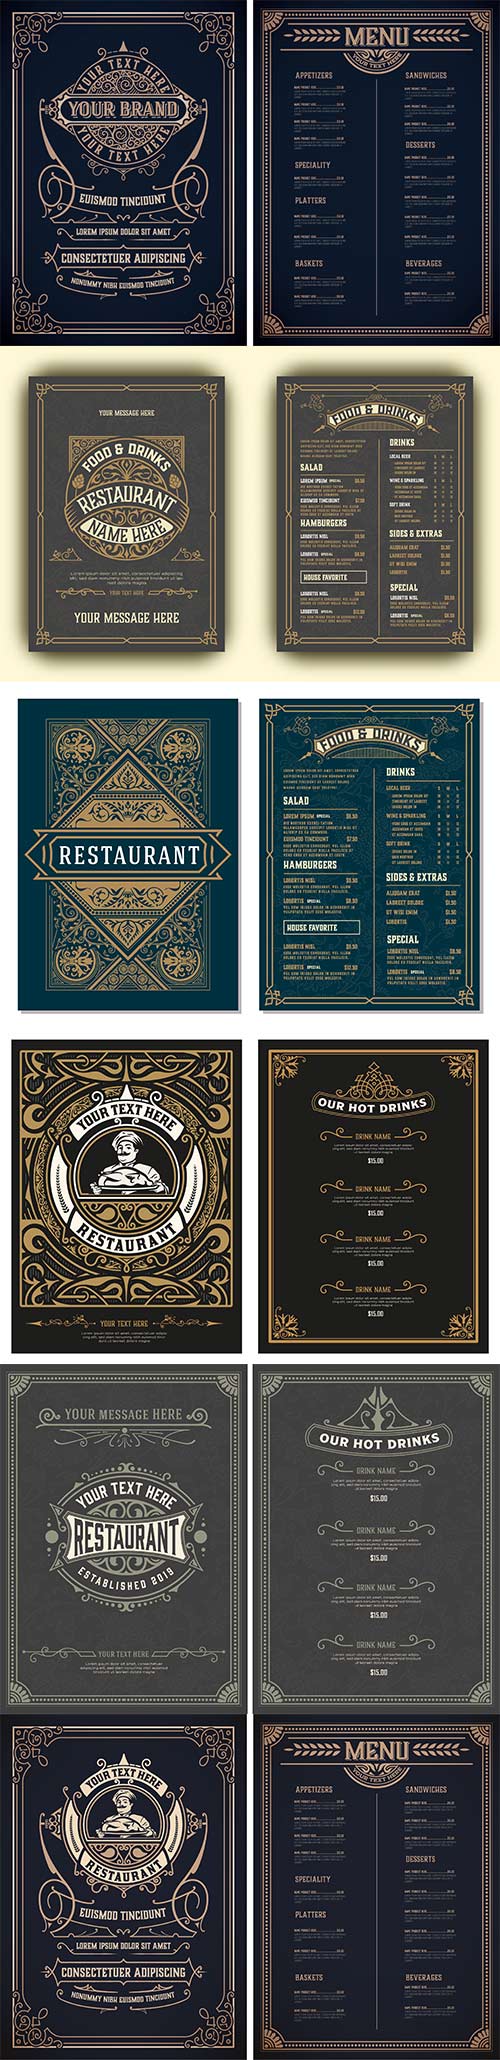 Vintage template for restaurant menu design with Chef